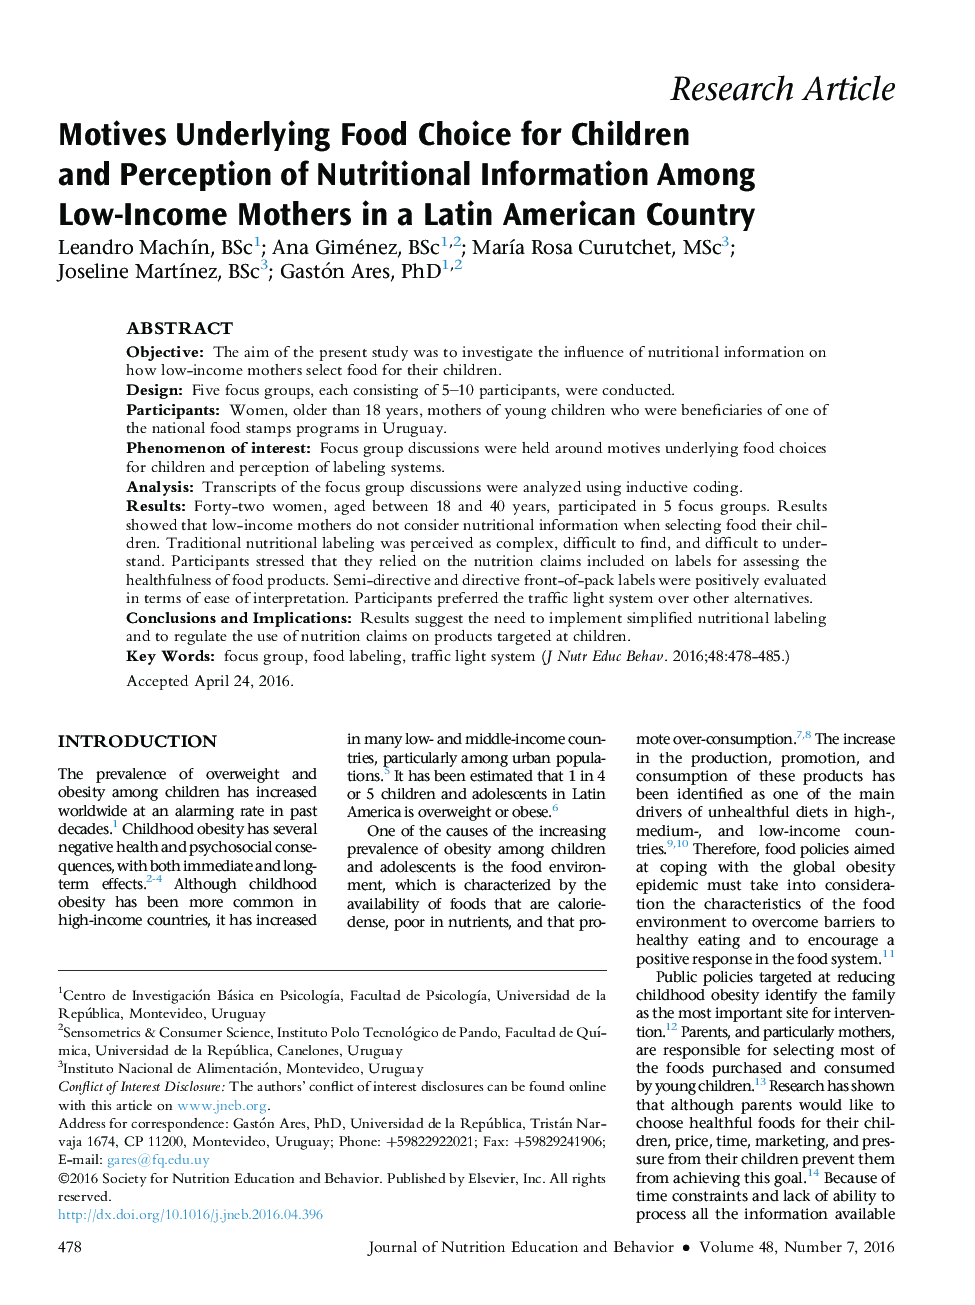 Motives Underlying Food Choice for Children and Perception of Nutritional Information Among Low-Income Mothers in a Latin American Country